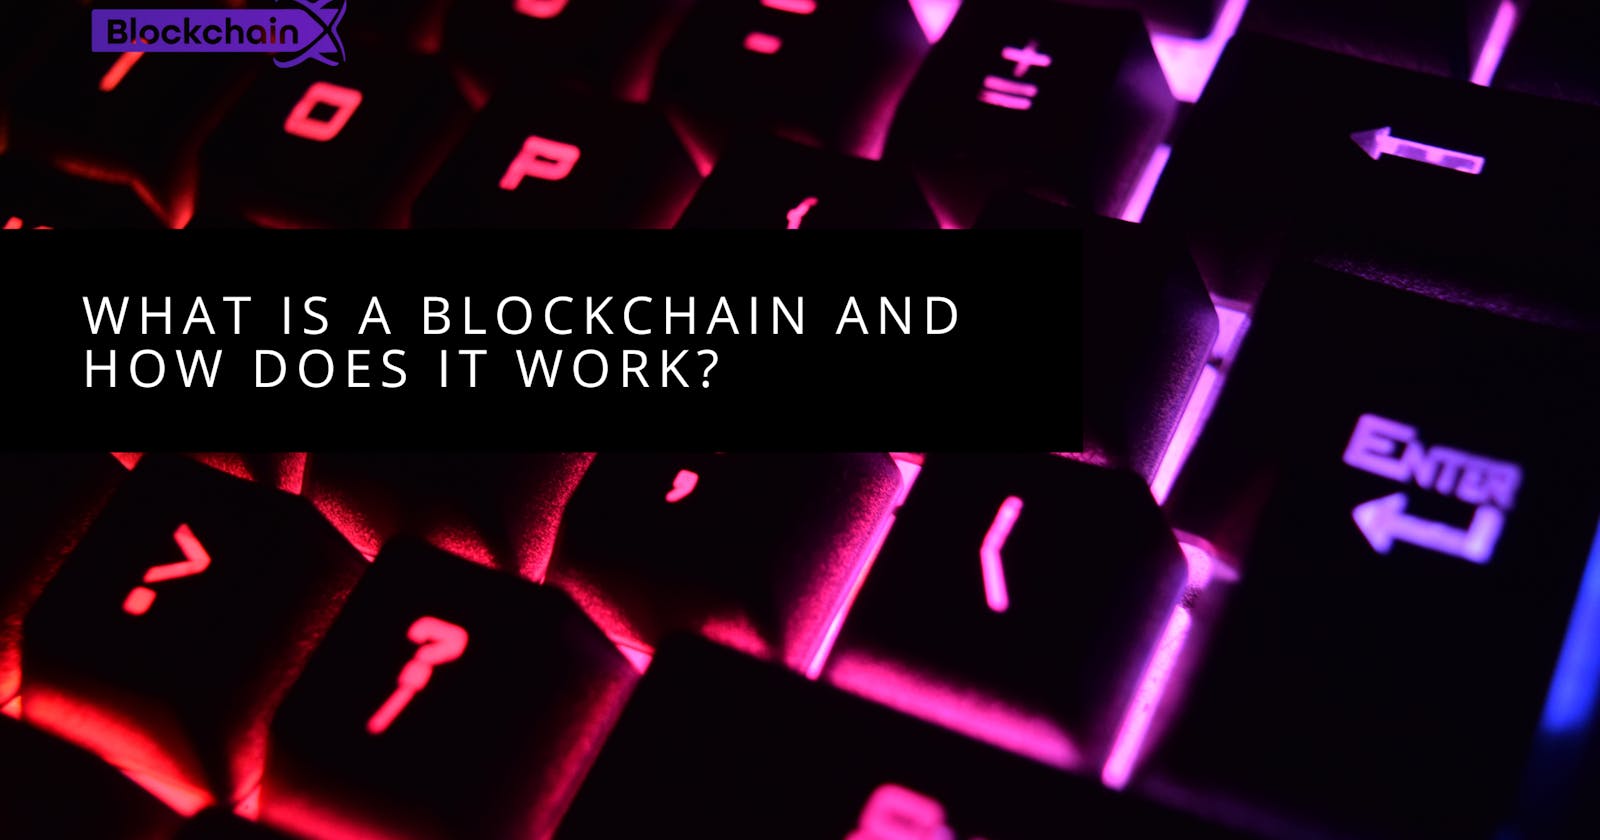 What is a blockchain and how does it work? Blockchain Money Investment and Business Benefits